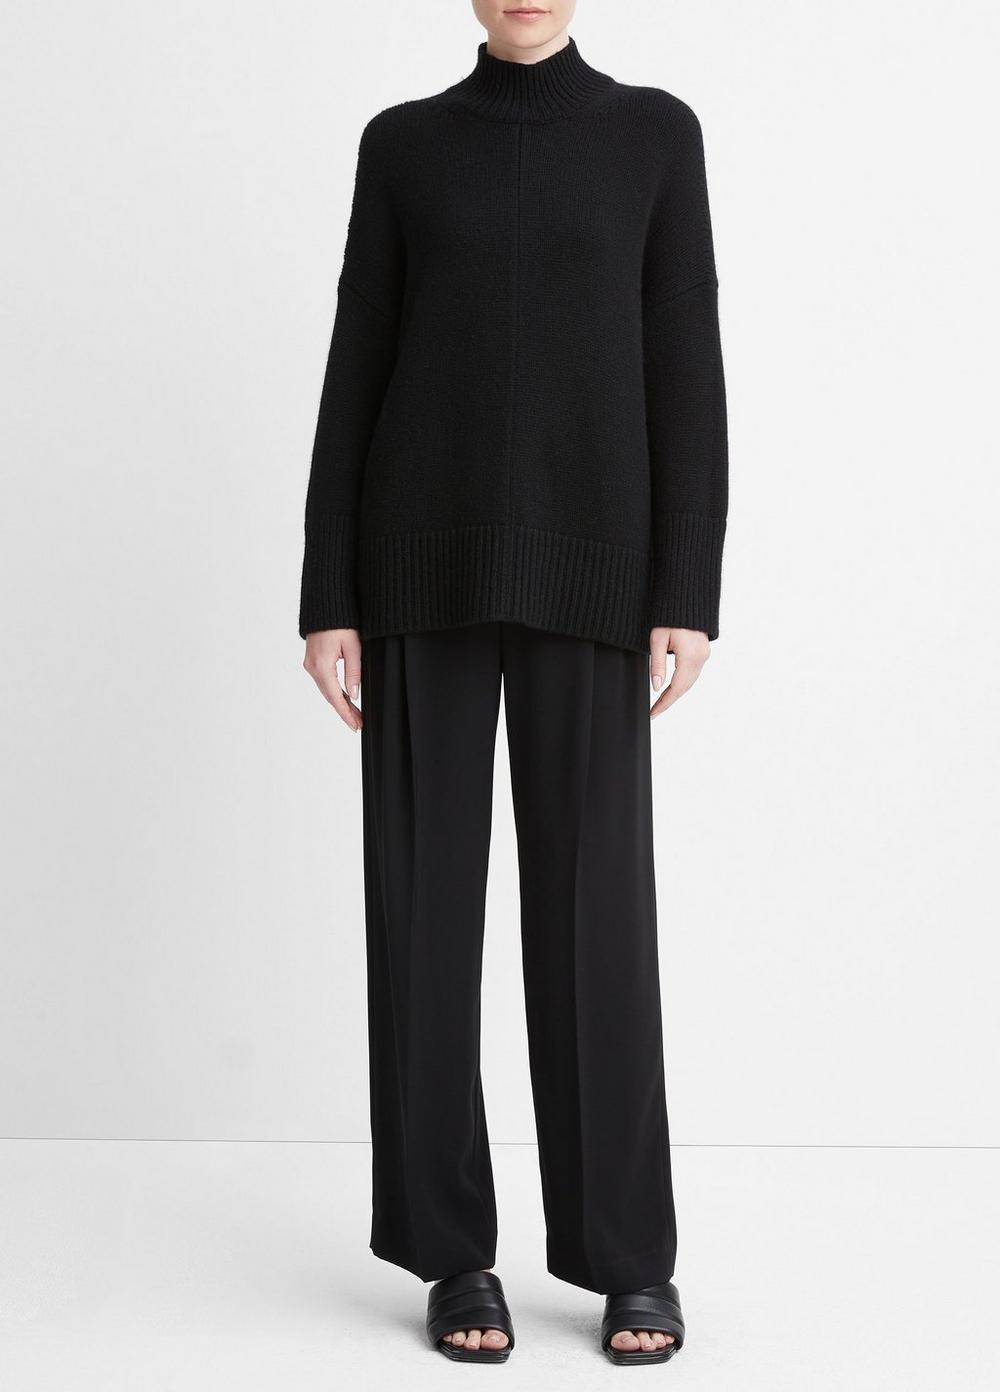 Wool And Cashmere Trapeze Turtleneck Sweater, Black, Size XS/S Vince